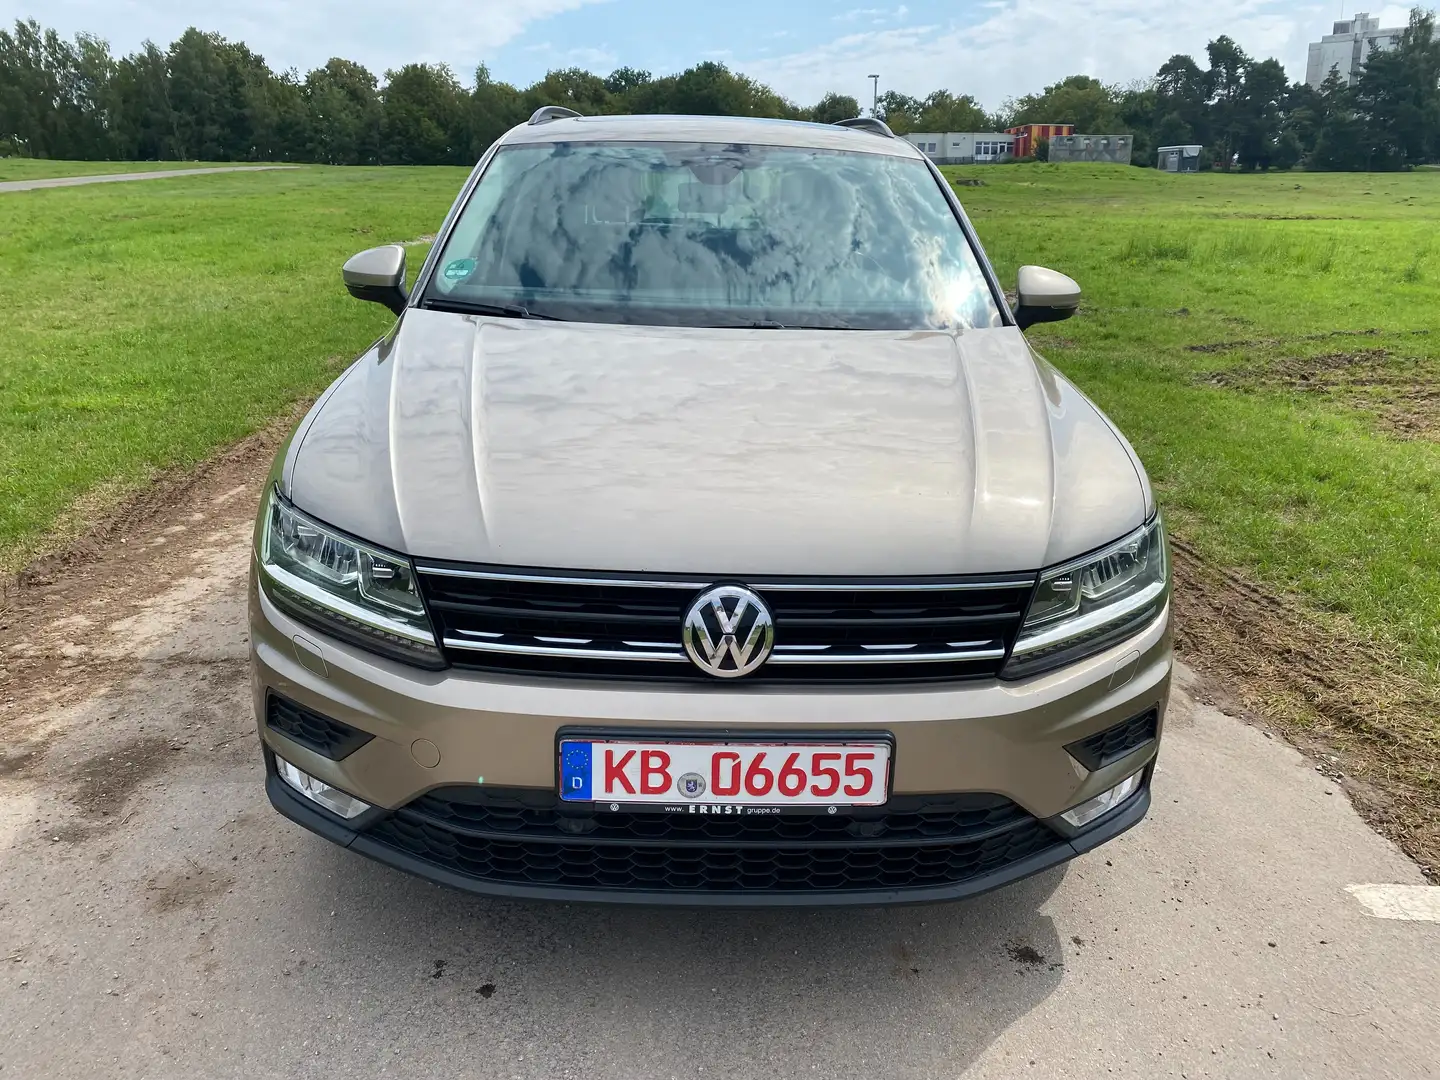 Volkswagen Tiguan Comfortline Panorama Dach Navi.LED Xenon 4xMotion Or - 2